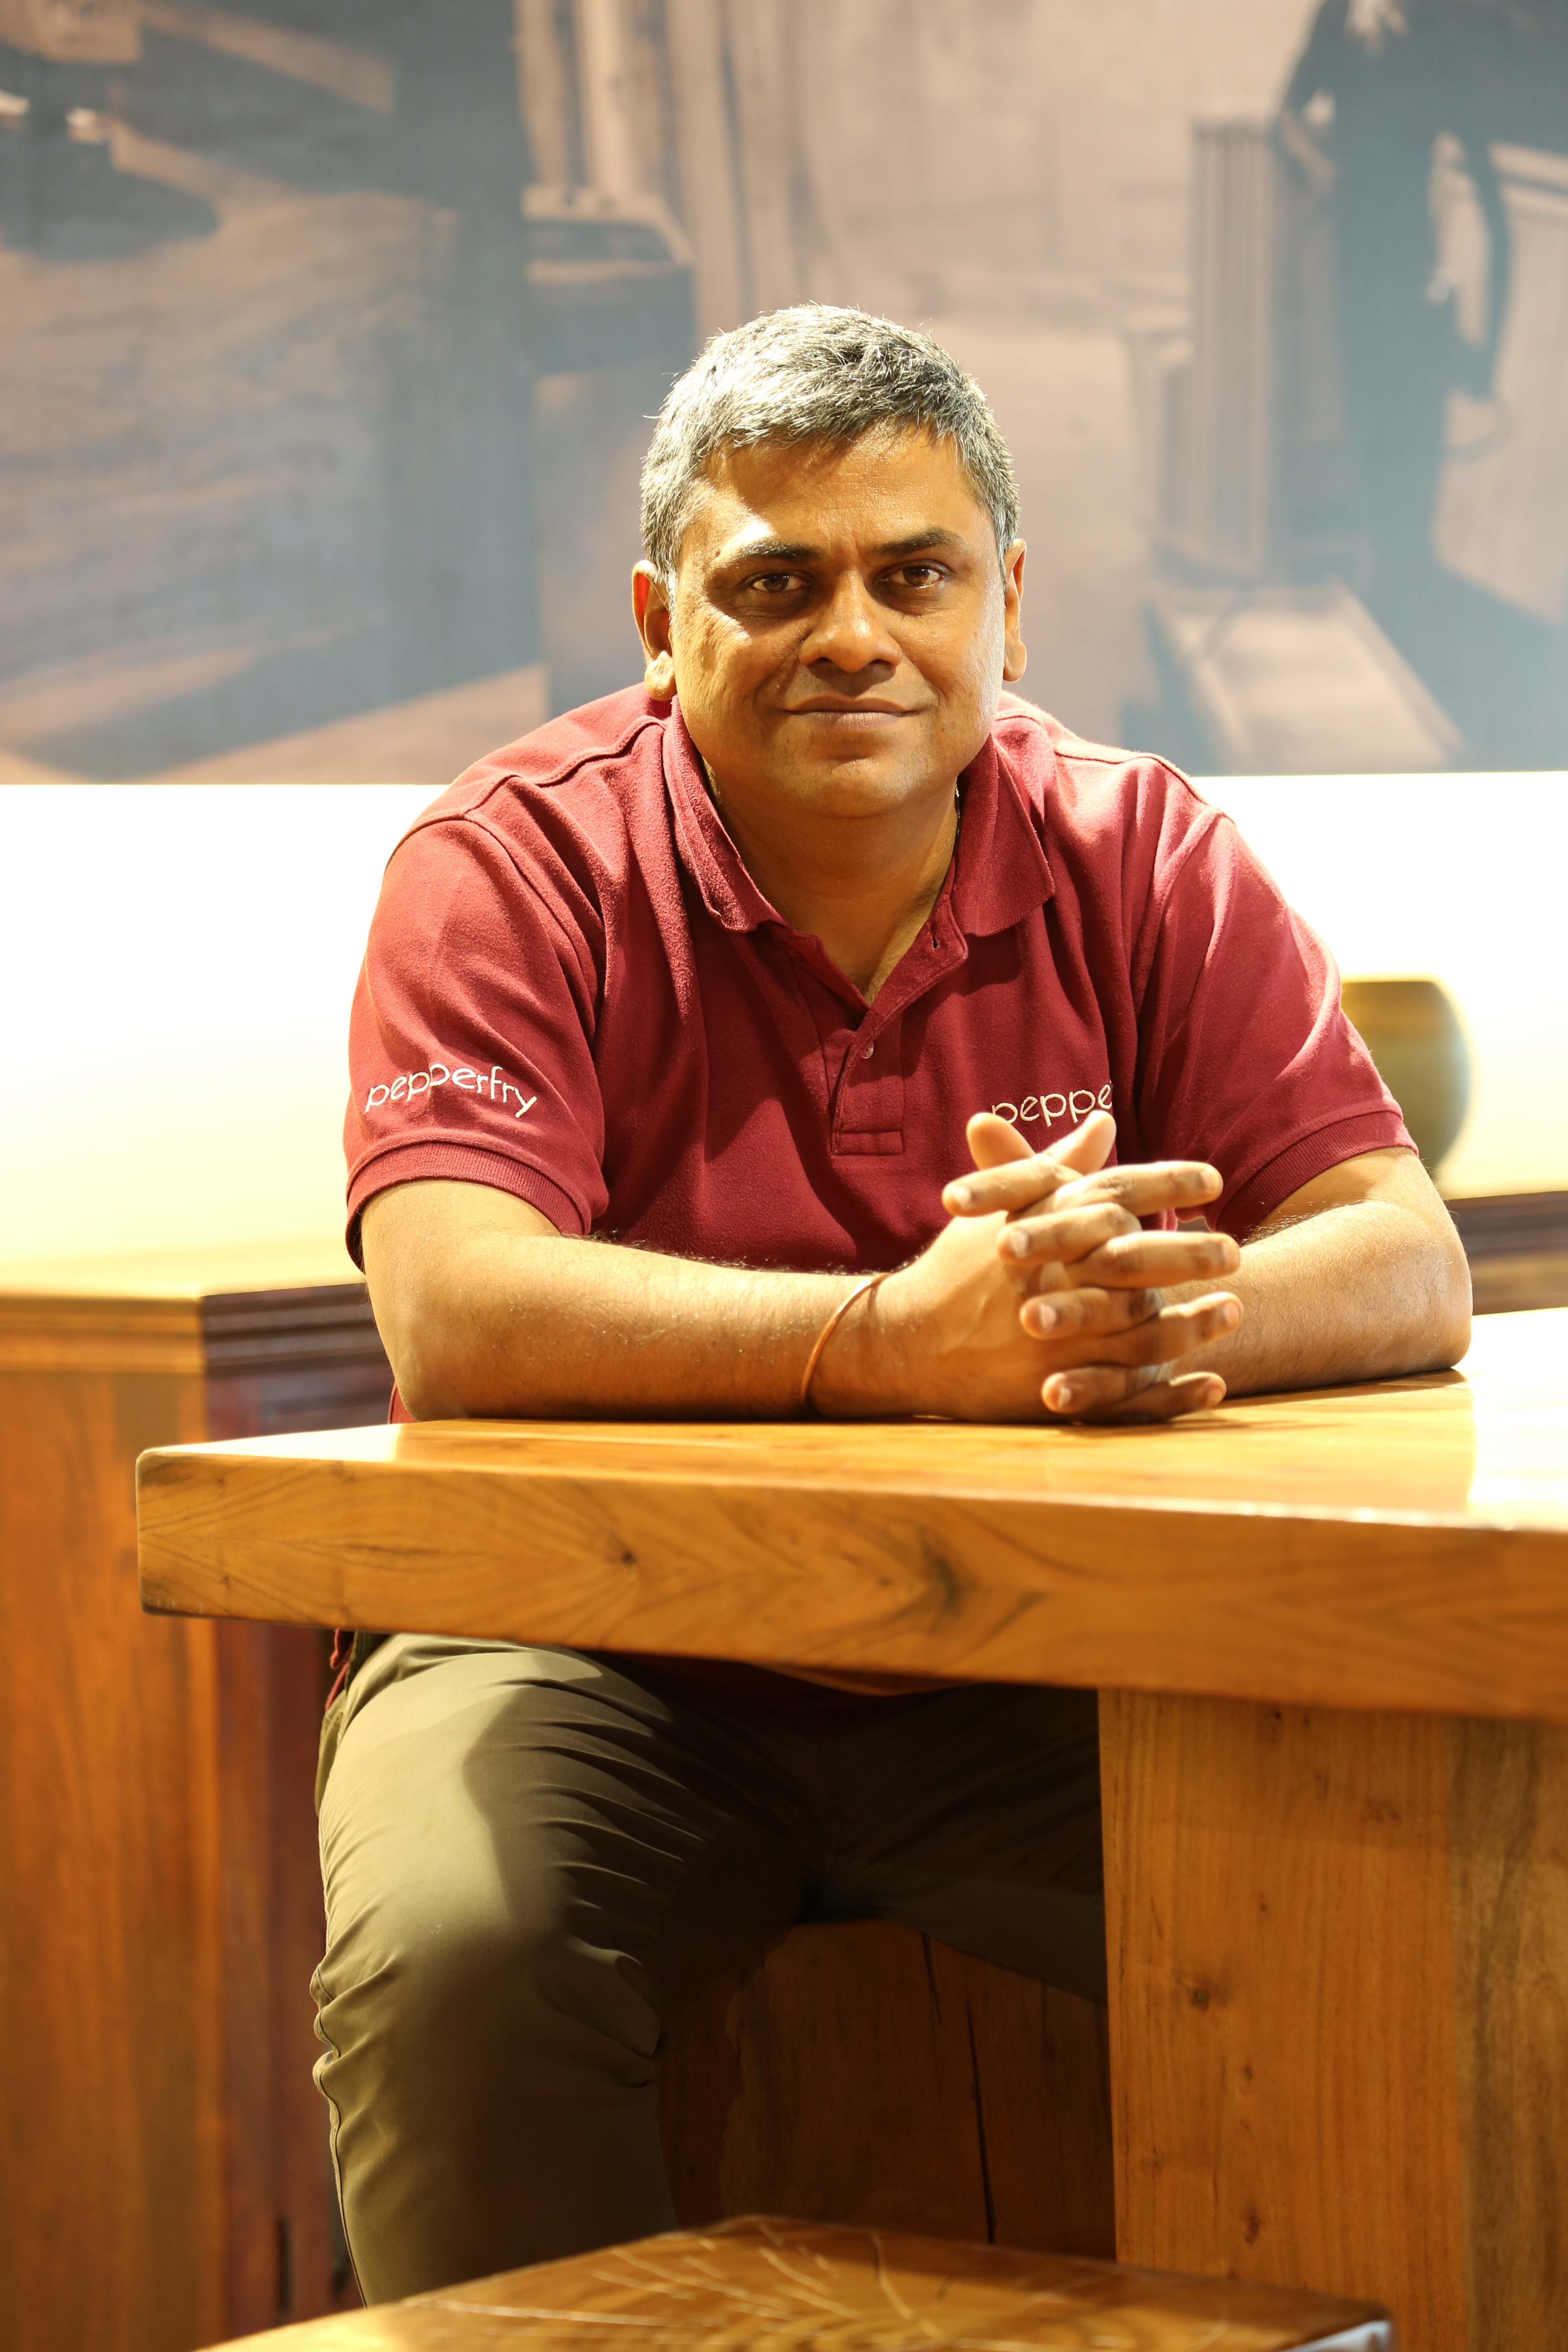 Ambareesh Murty, <span>Co-founder & CEO<br>  Pepperfry</span>